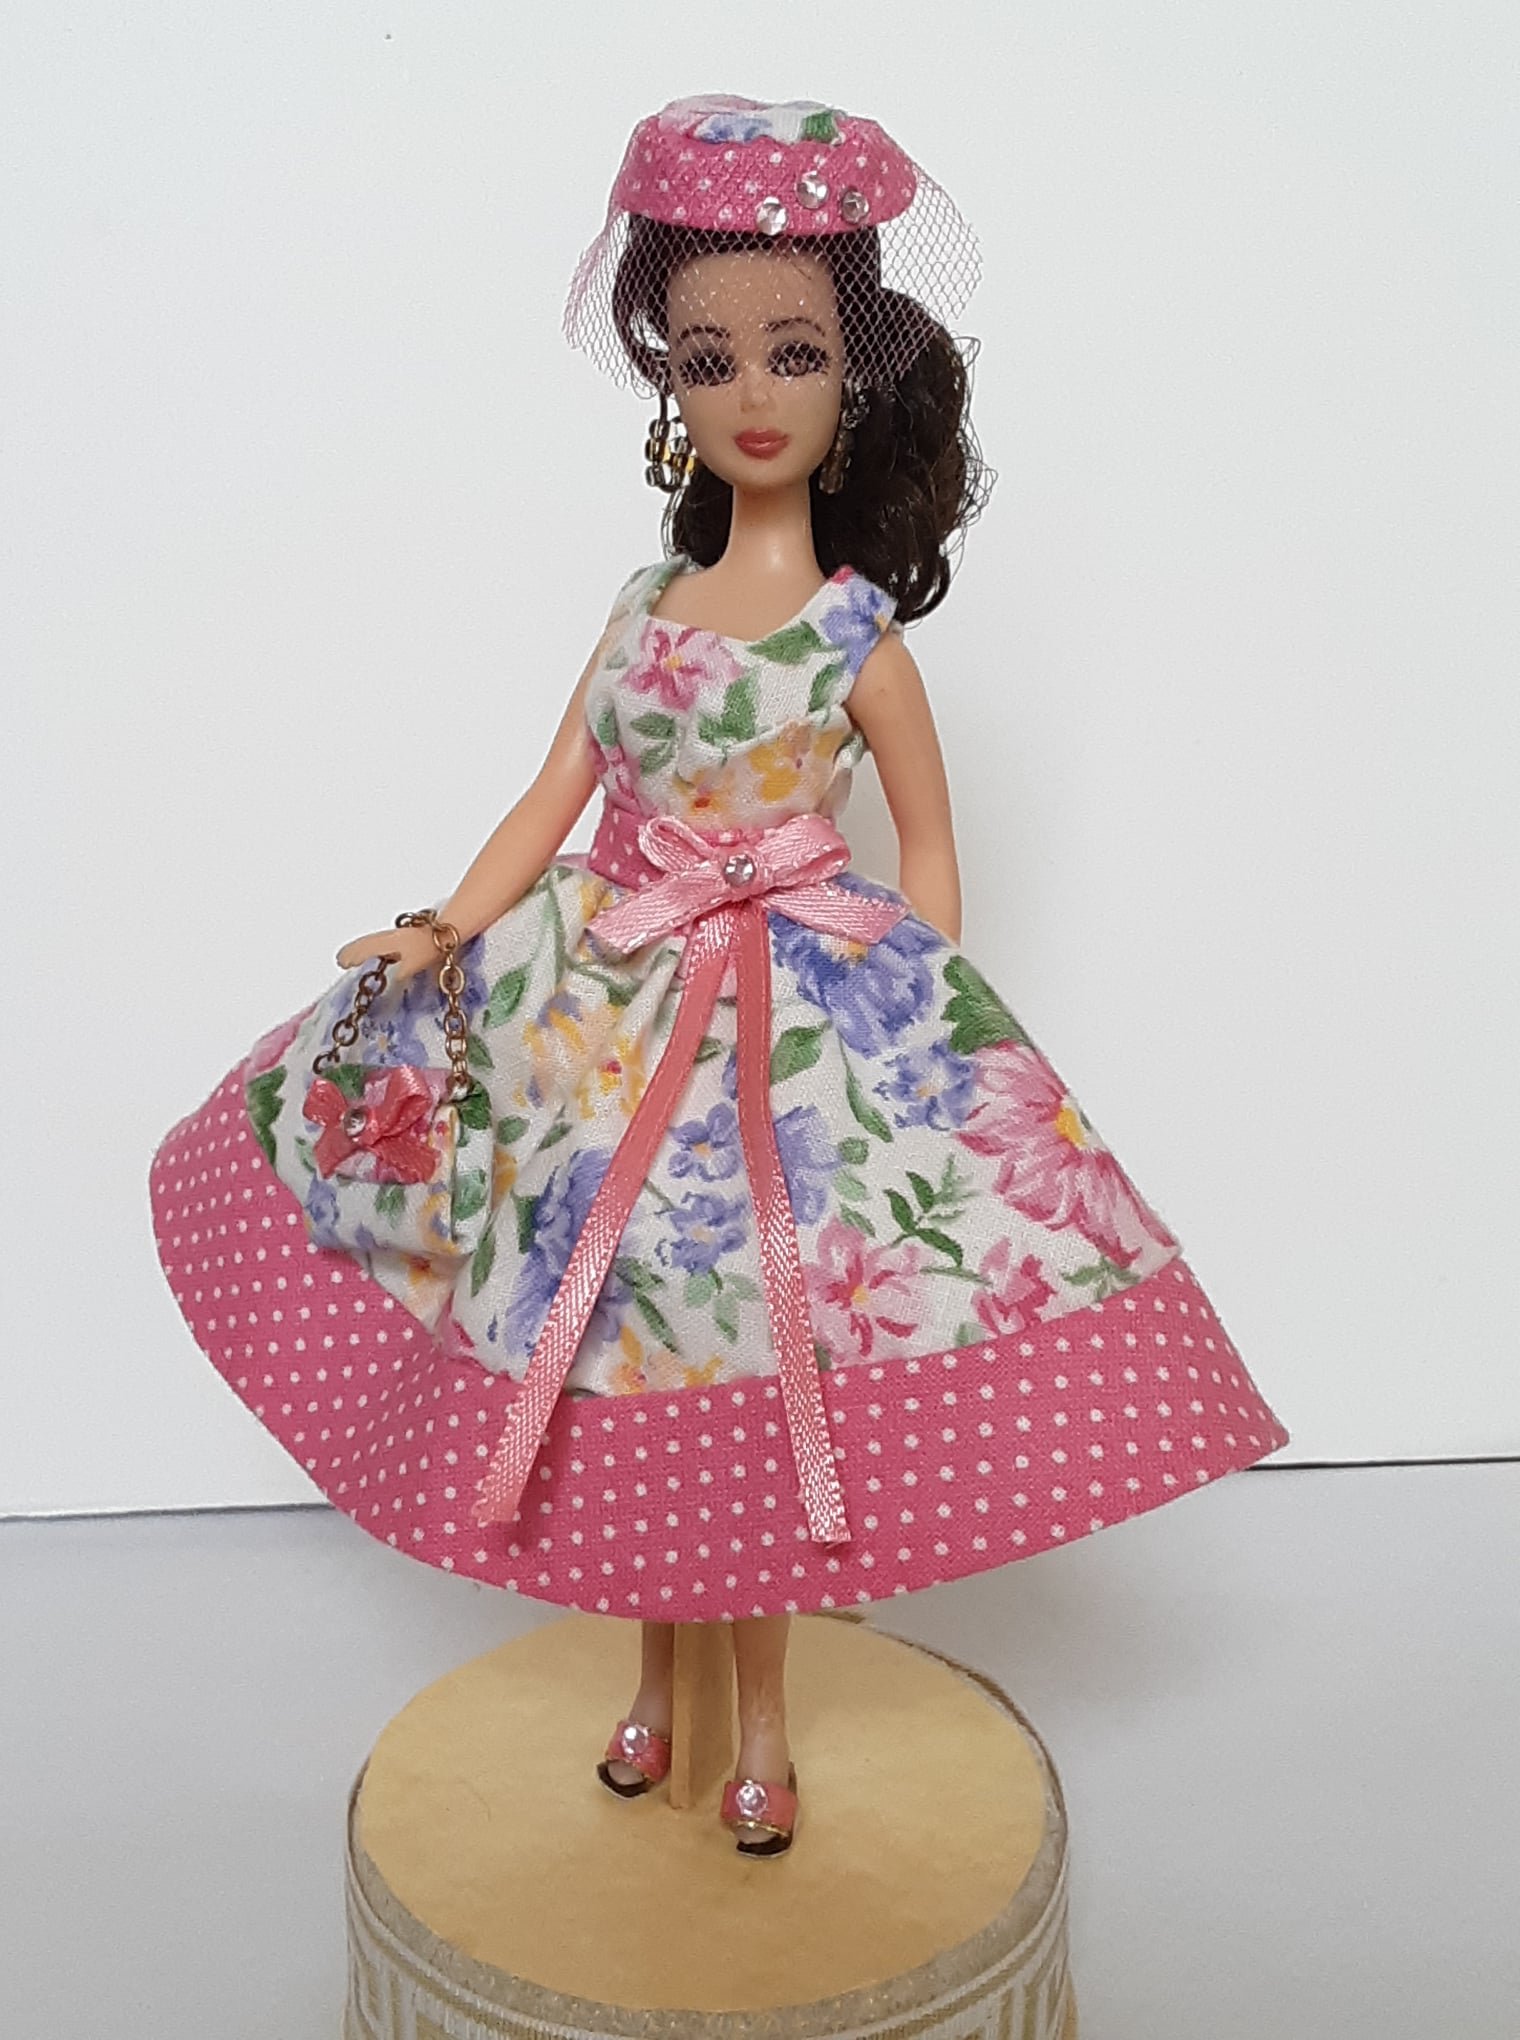 Floral and polka dot OOAK handmade Dawn Dress with matching accessories and hat